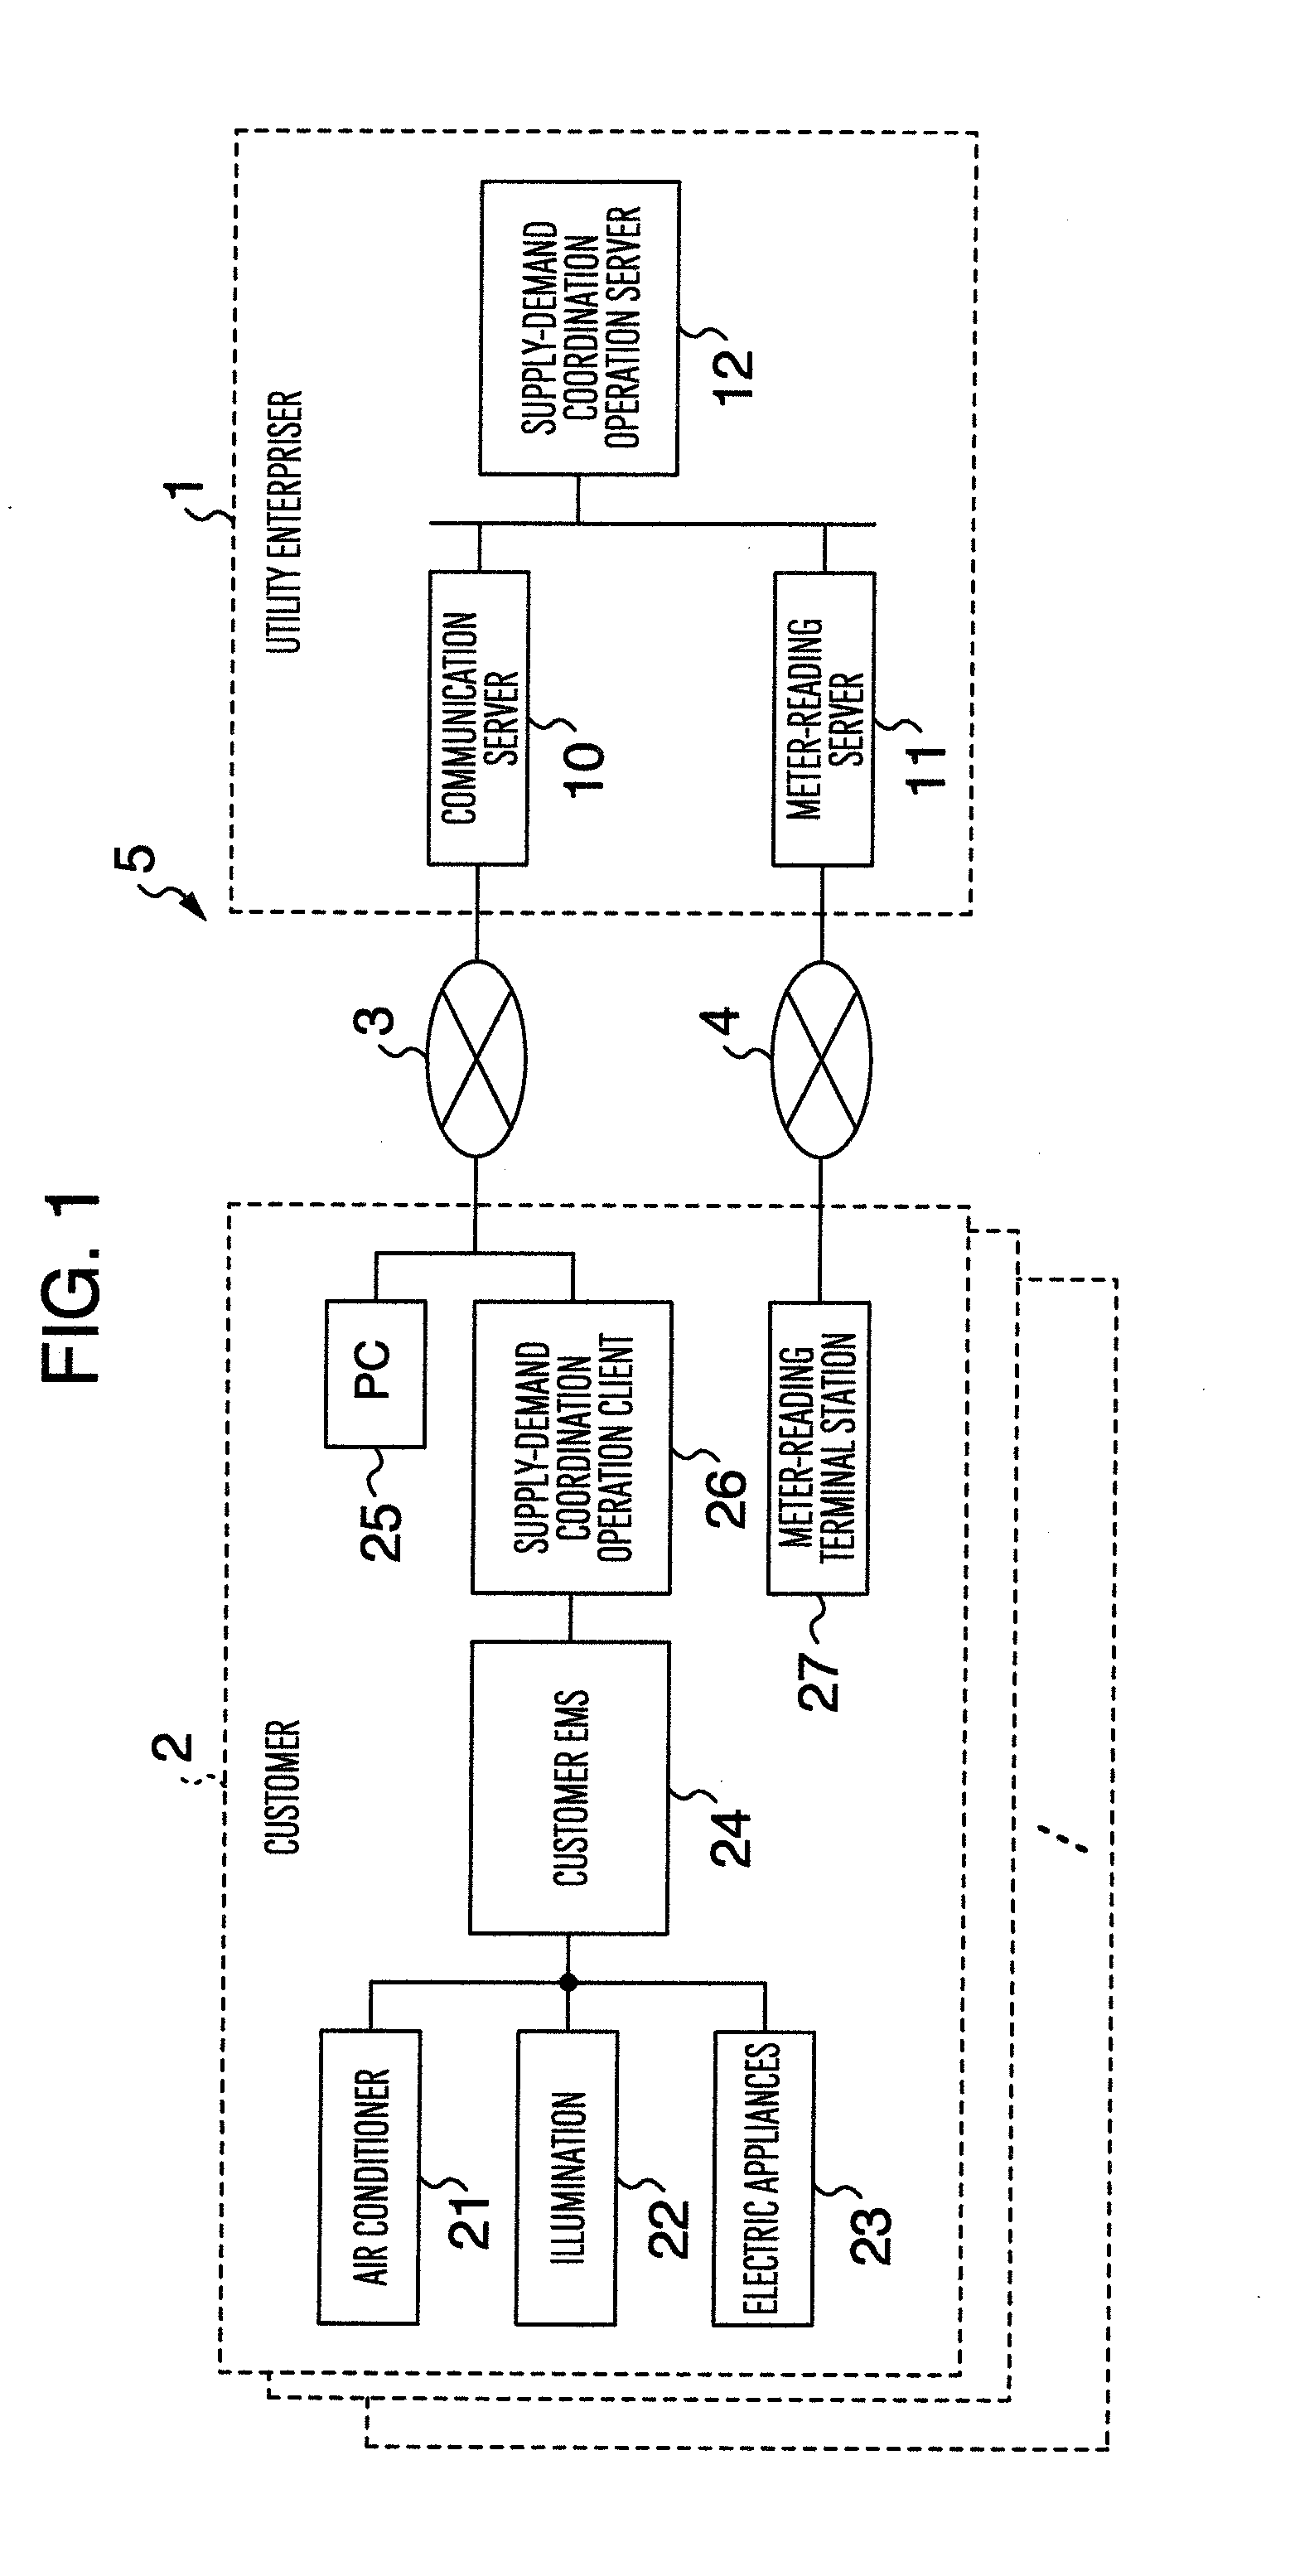 Energy management apparatus for customers